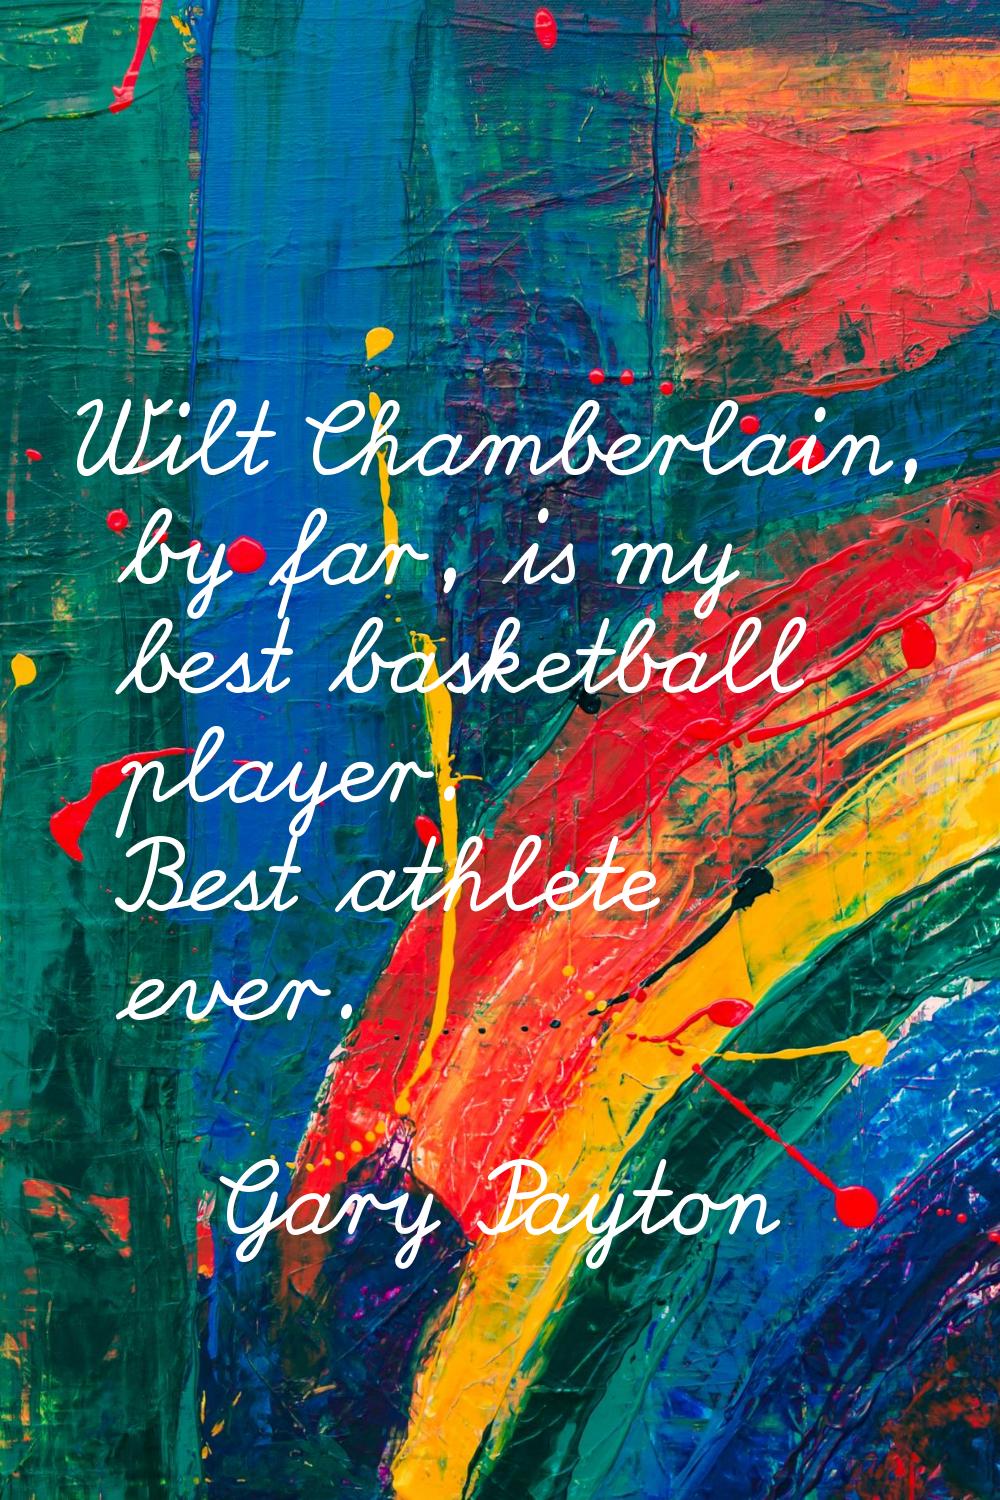 Wilt Chamberlain, by far, is my best basketball player. Best athlete ever.